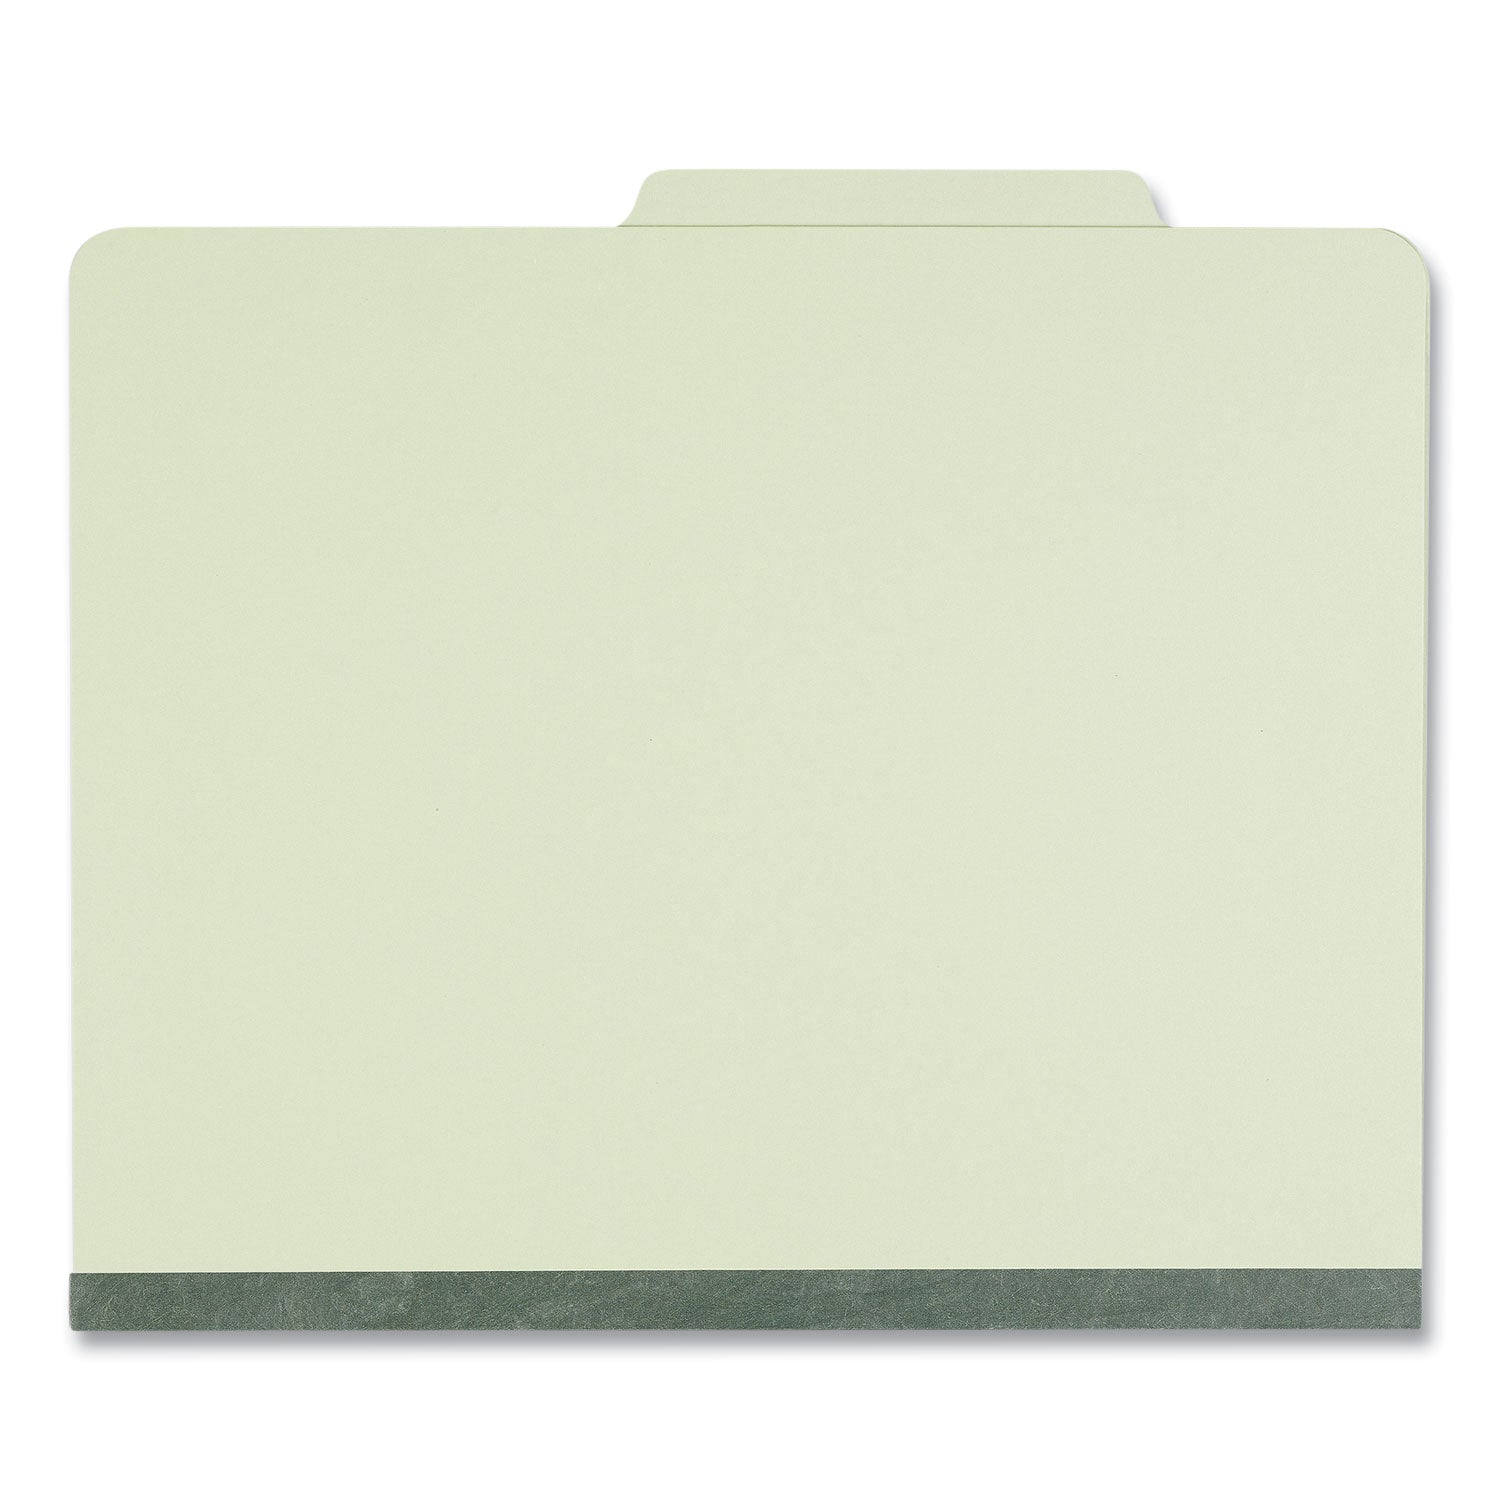 Four-Section Pressboard Classification Folders, 2" Expansion, 1 Divider, 4 Fasteners, Letter Size, Green Exterior, 10/Box - 